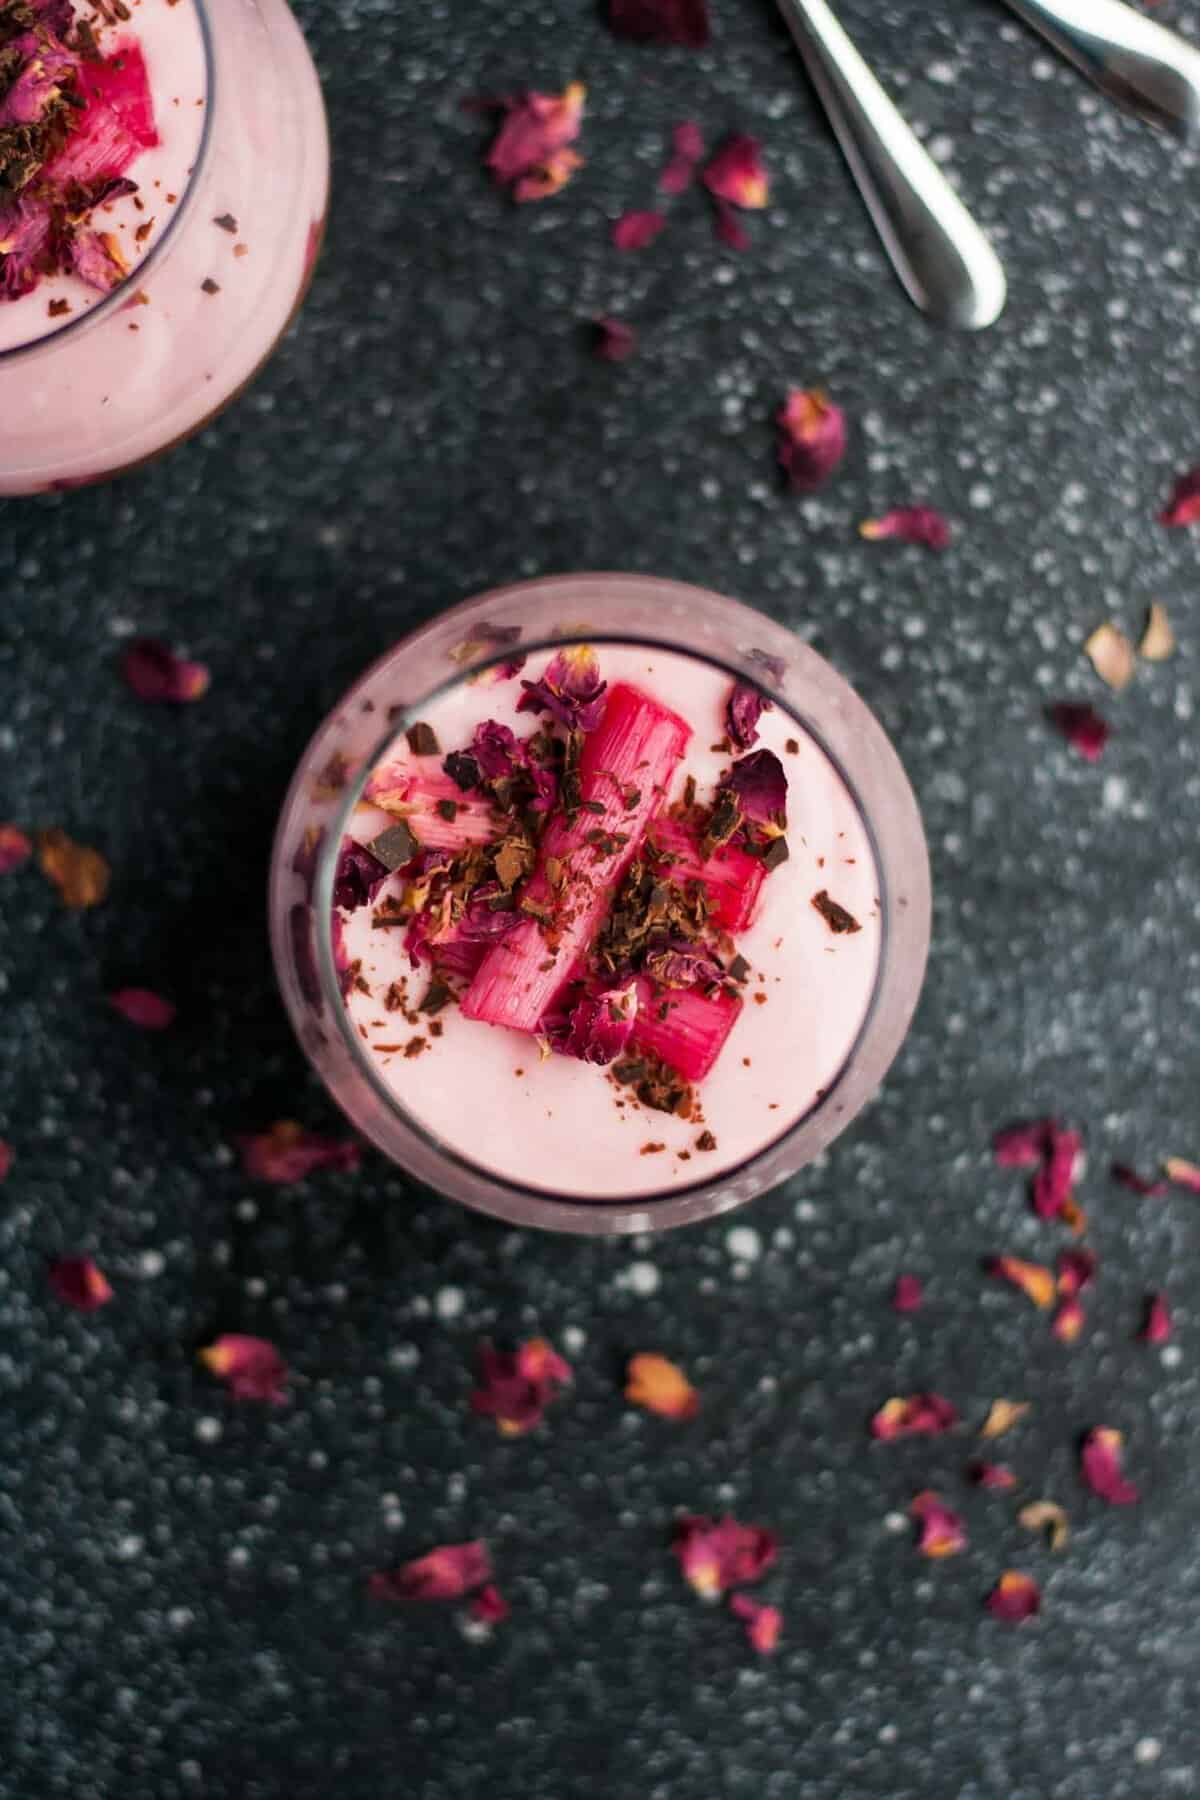 Close shot of rhubarb, chocolate and rose petals on top of rhubarb parfait in a glass.